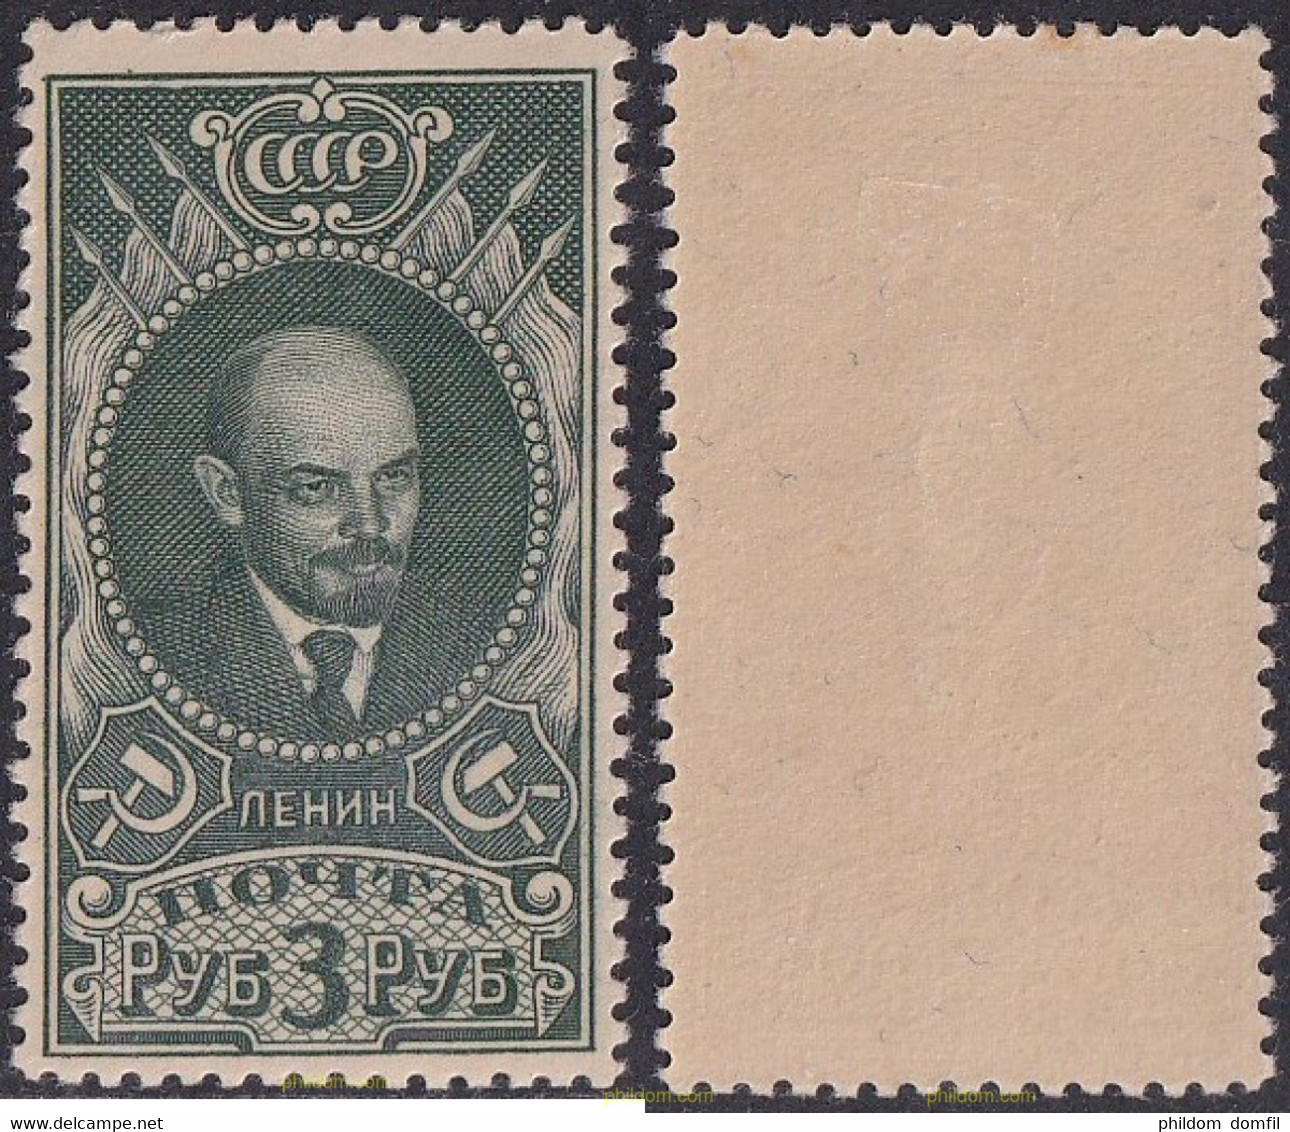 693628 HINGED UNION SOVIETICA 1939 LENIN - Collections